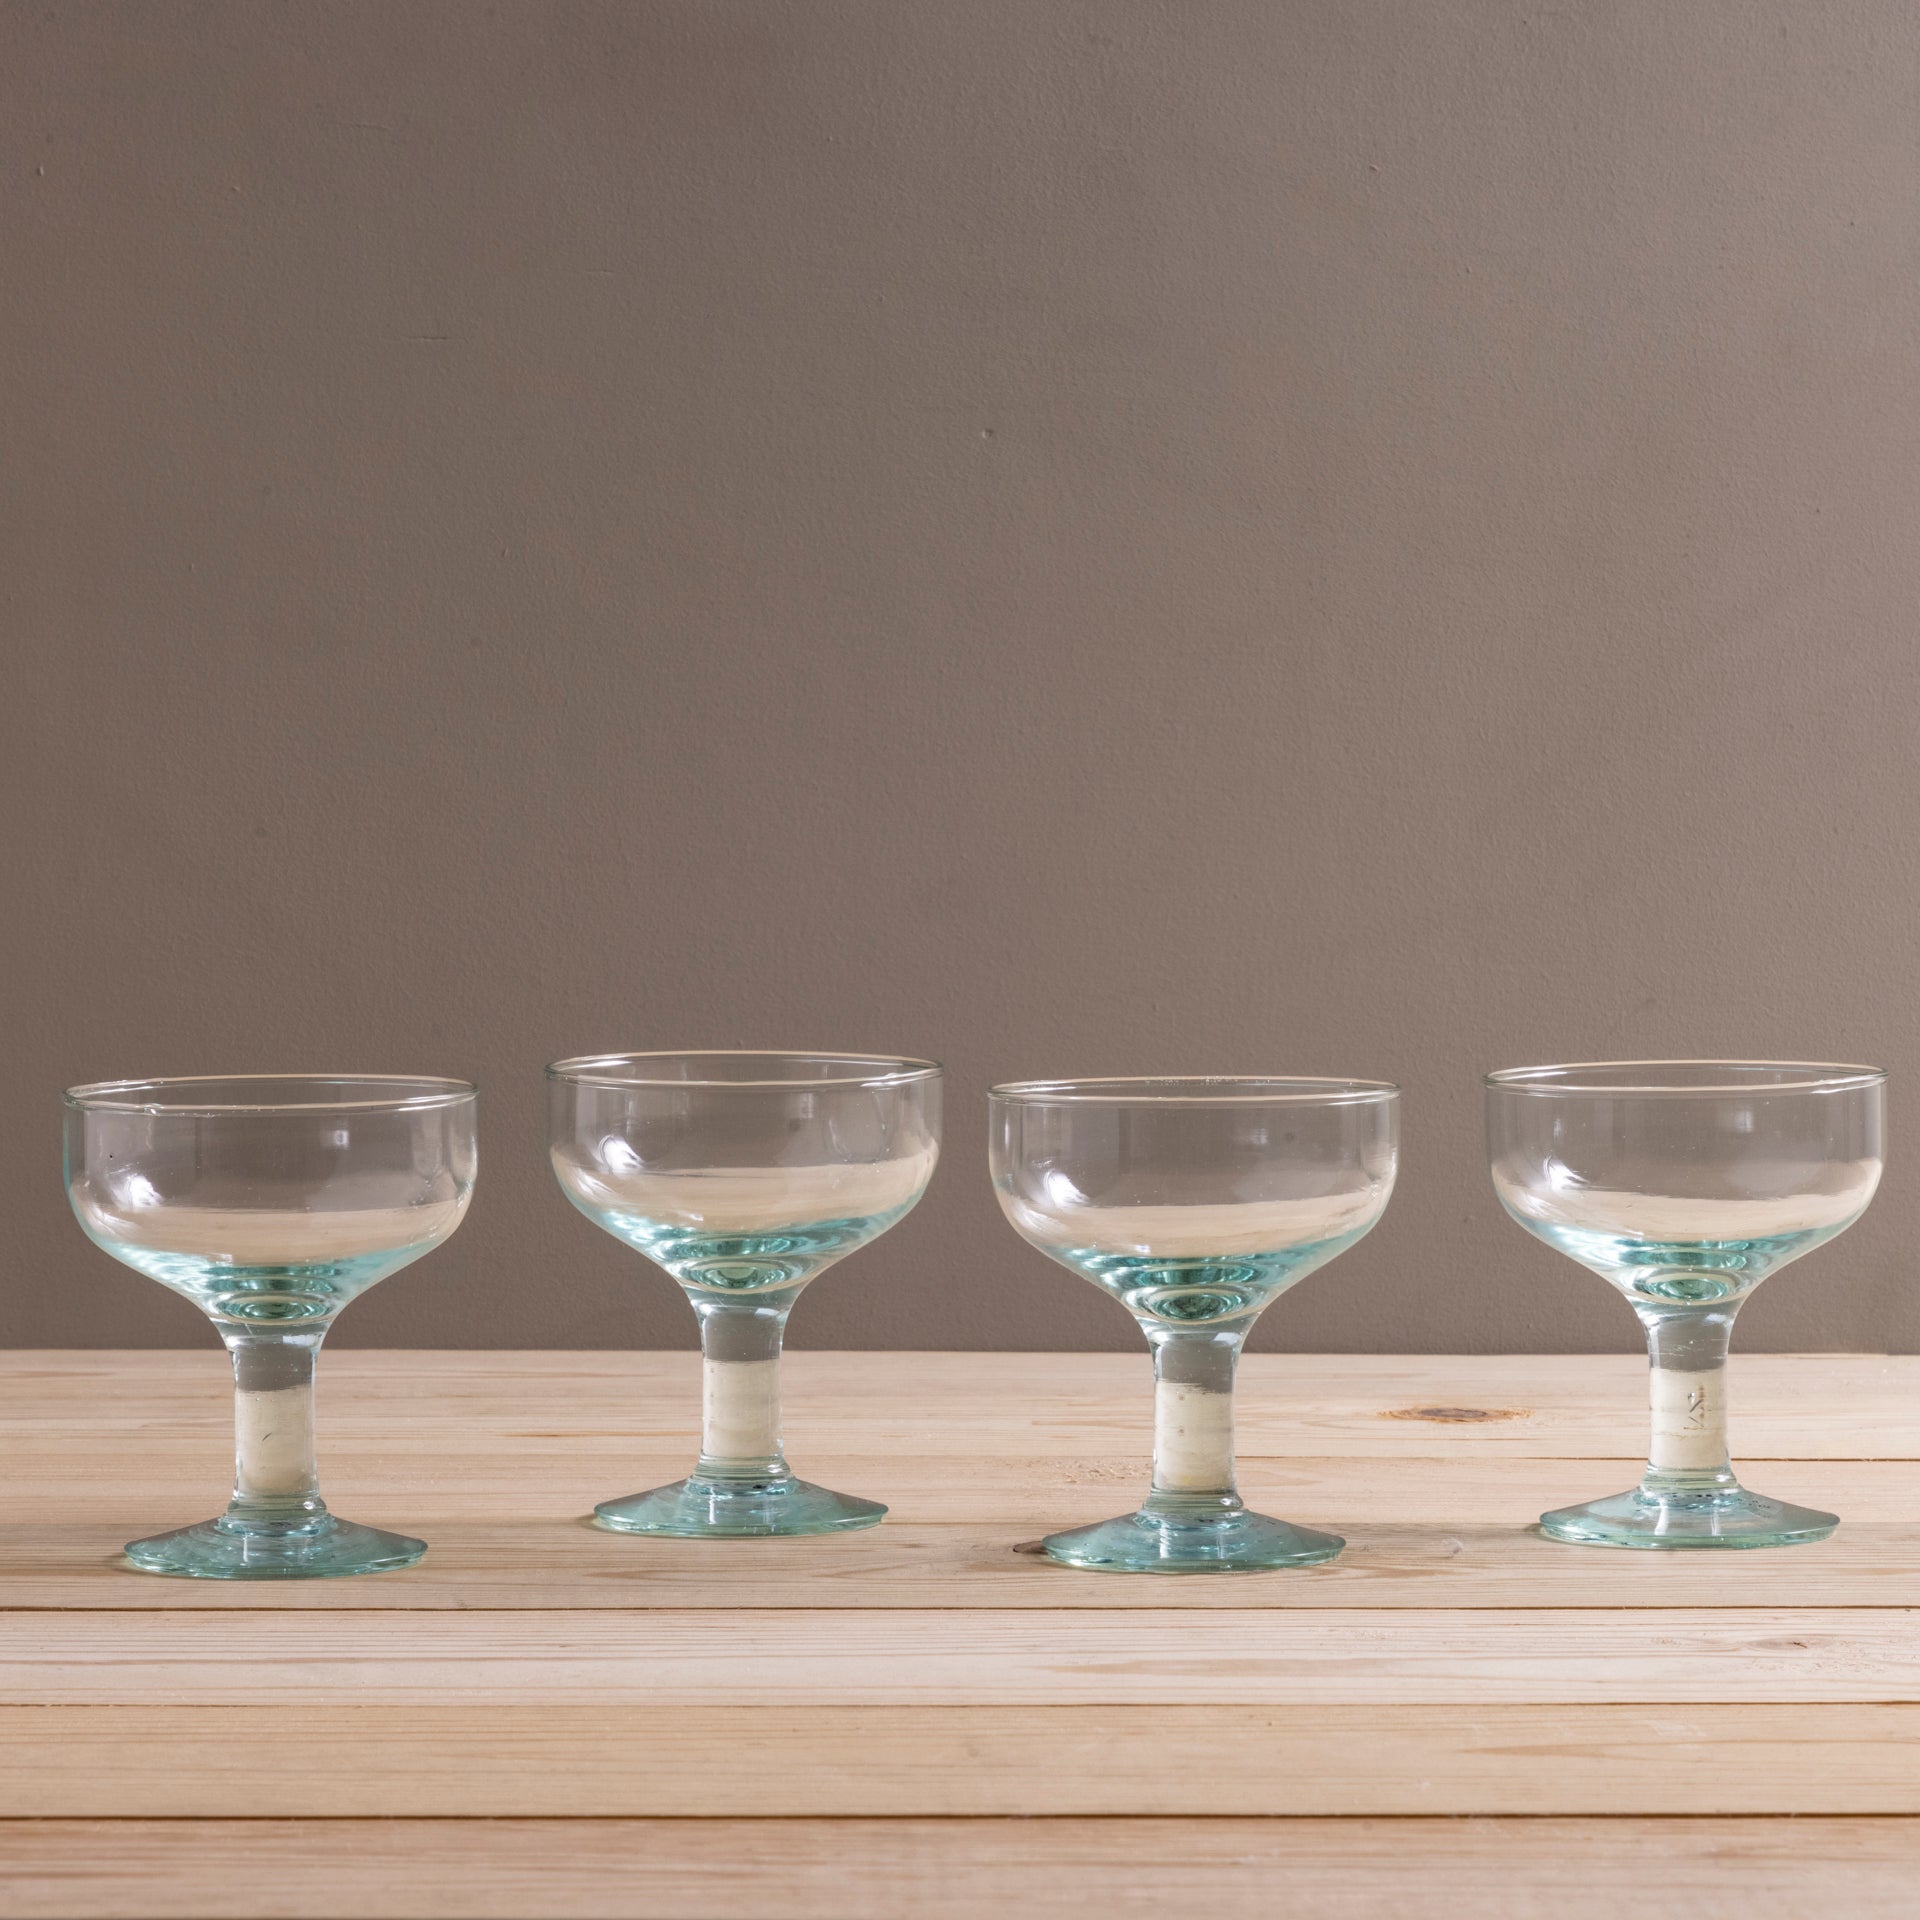 Vintage Mexican Hand Blown Blue-rimmed Martini Glasses, Set of 2, Barware 